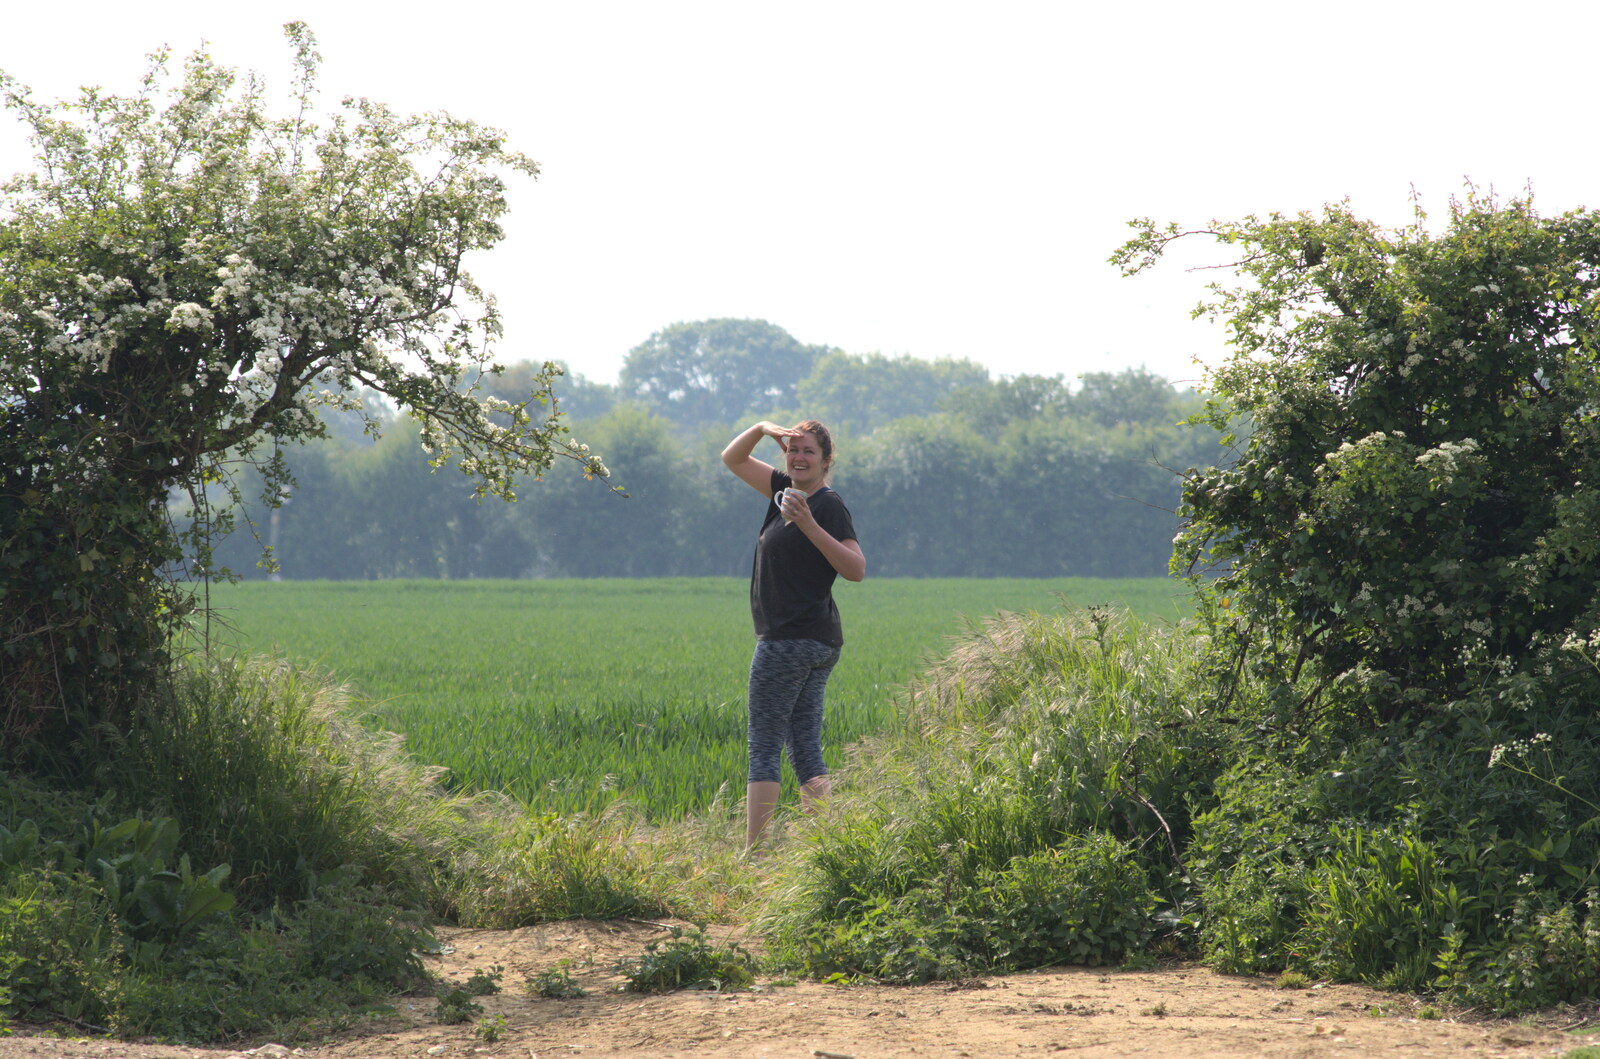 Isobel looks around for more low-flying planes from Pin-hole Cameras and a Red Arrows Flypast, Brome, Suffolk - 8th May 2020